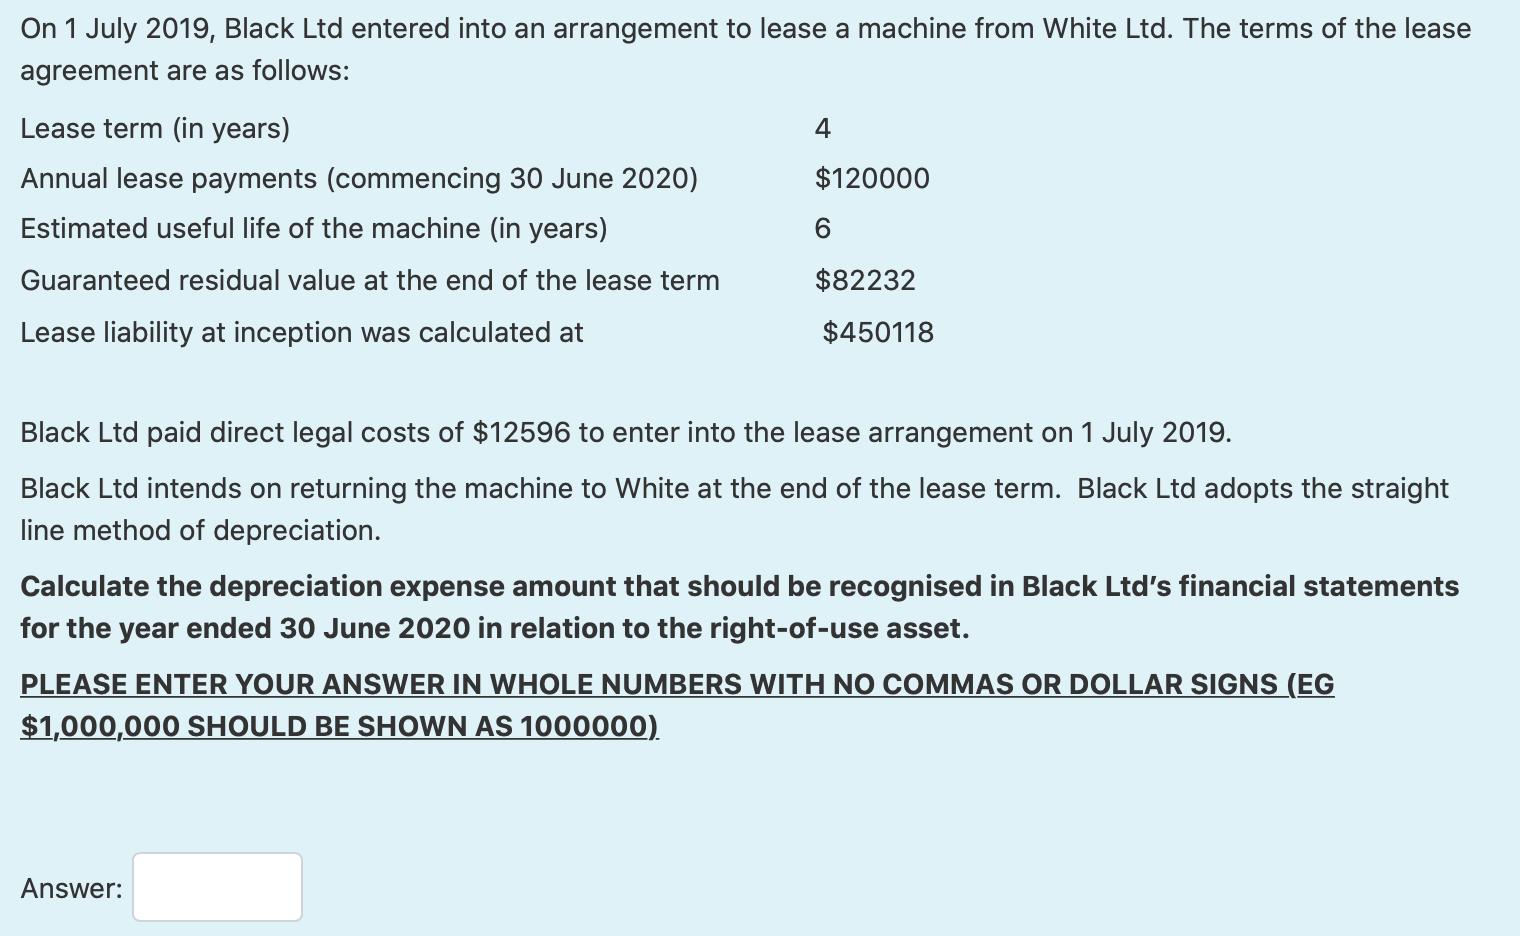 On 1 July 2019, Black Ltd entered into an arrangement to lease a machine from White Ltd. The terms of the lease agreement are